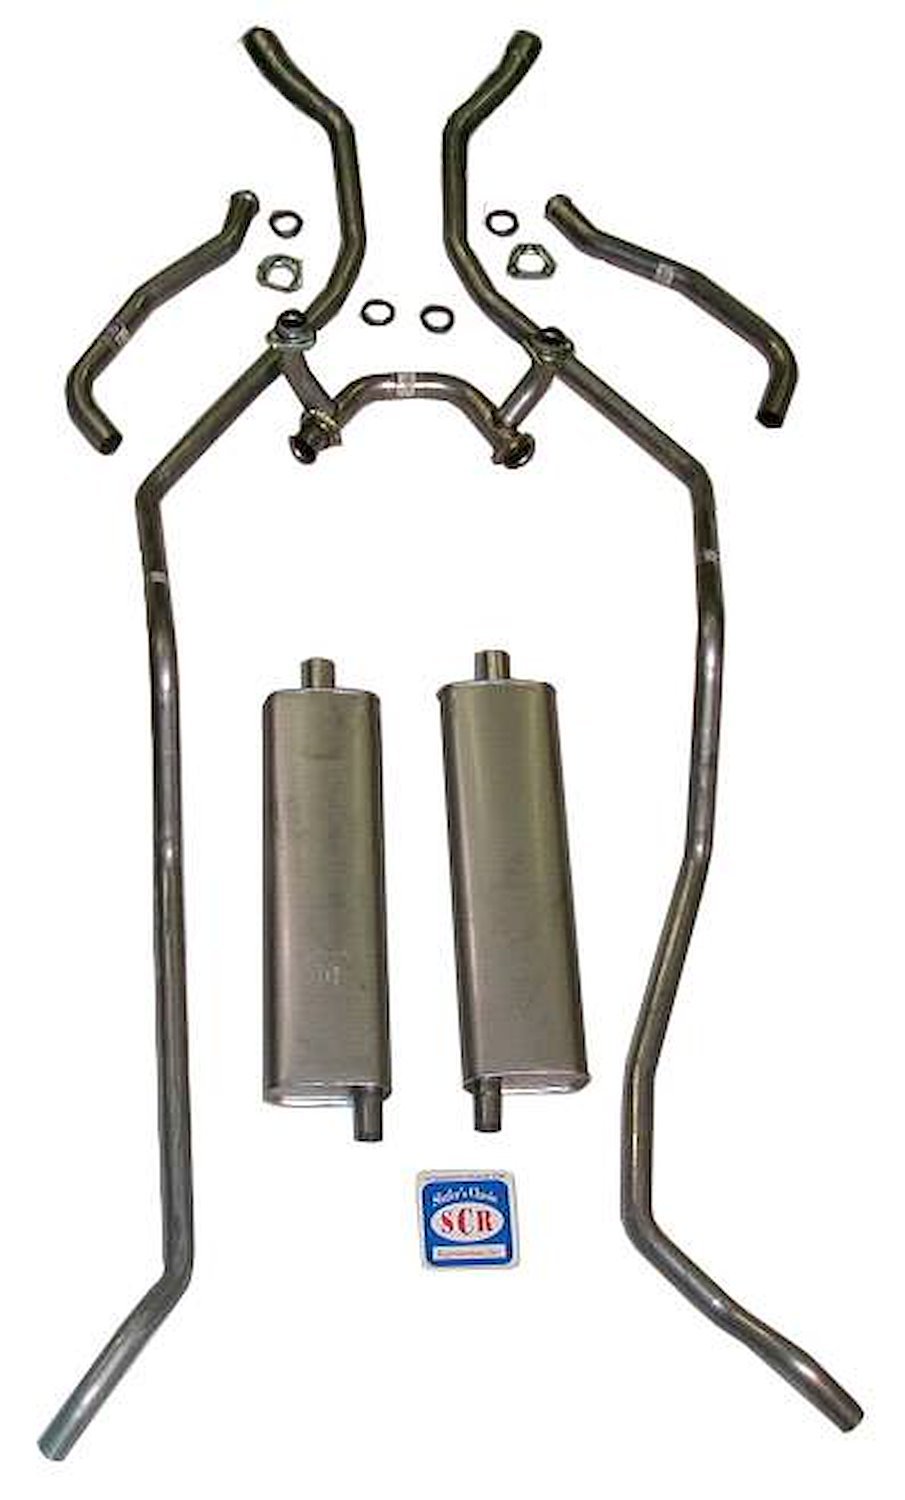 73010 1958 Chevrolet Full-Size Exhaust System 8-cyl 348 Dual Exhaust